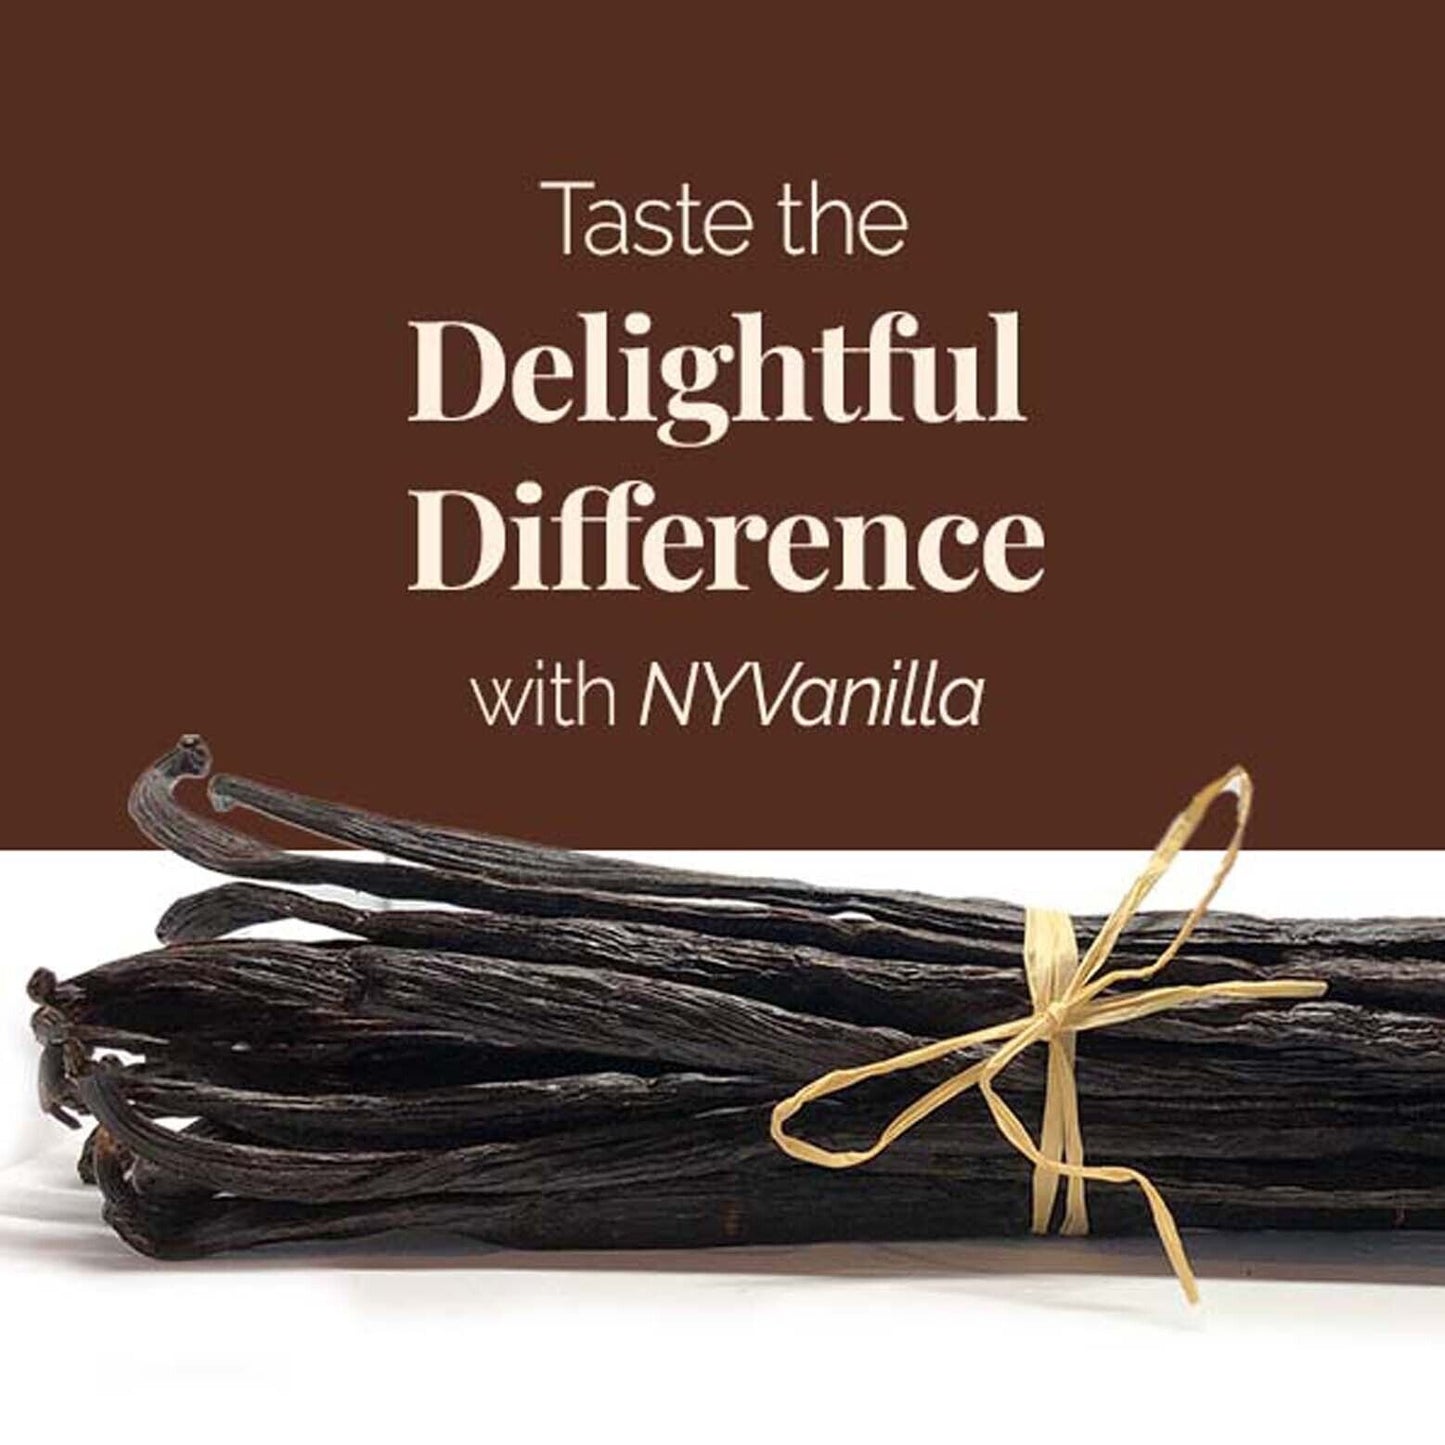 Taste the Delightful difference with NYVanilla